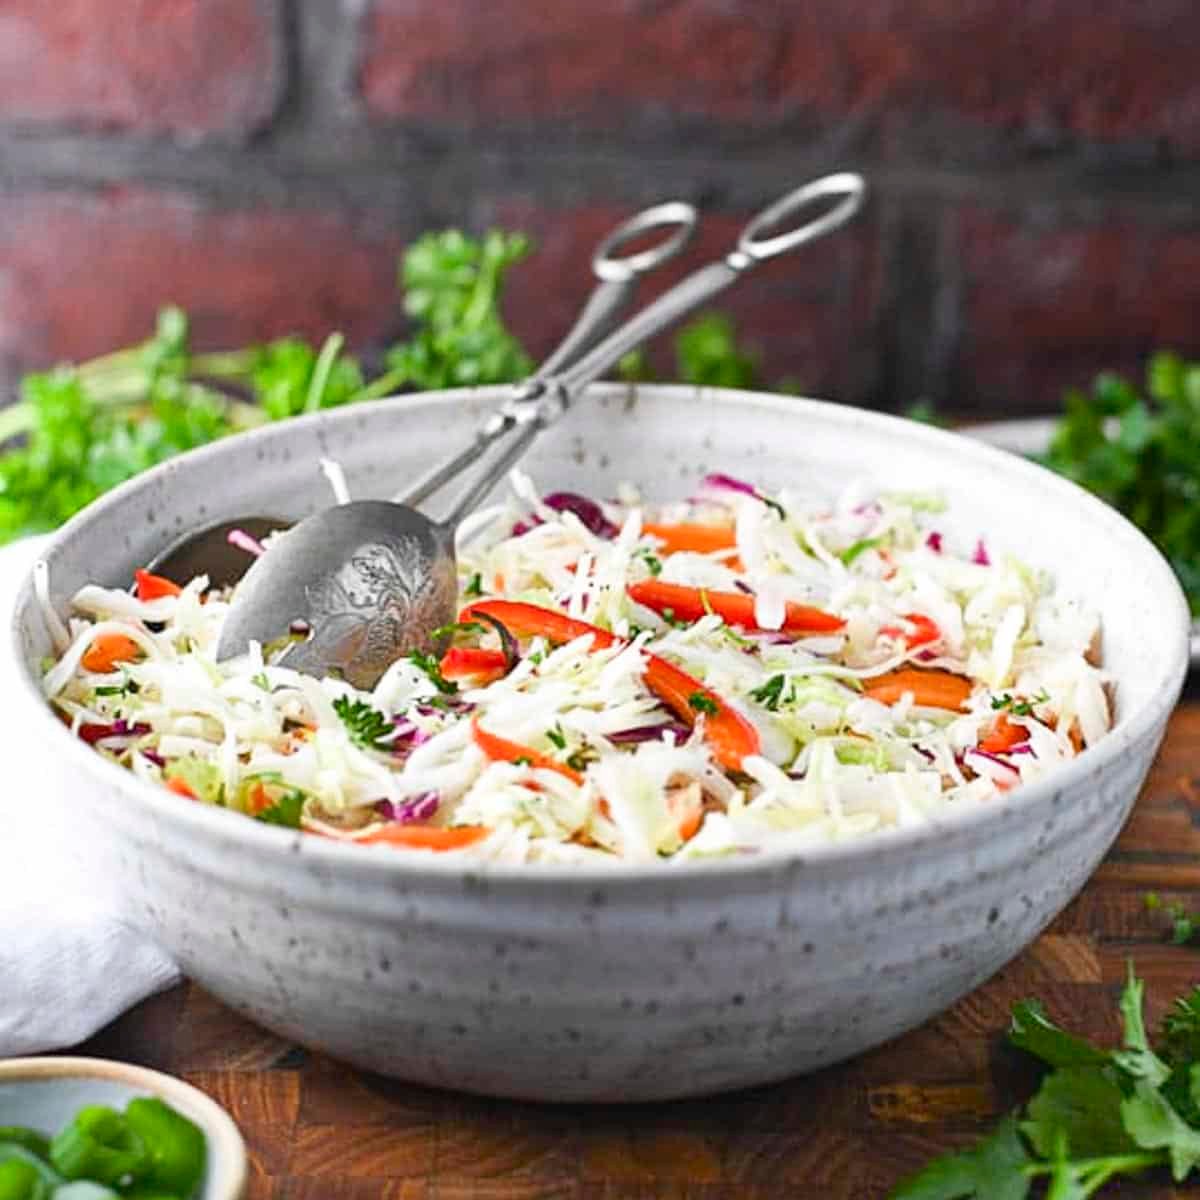 Square side shot of a bowl of old fashioned coleslaw with vinegar on a wooden table.